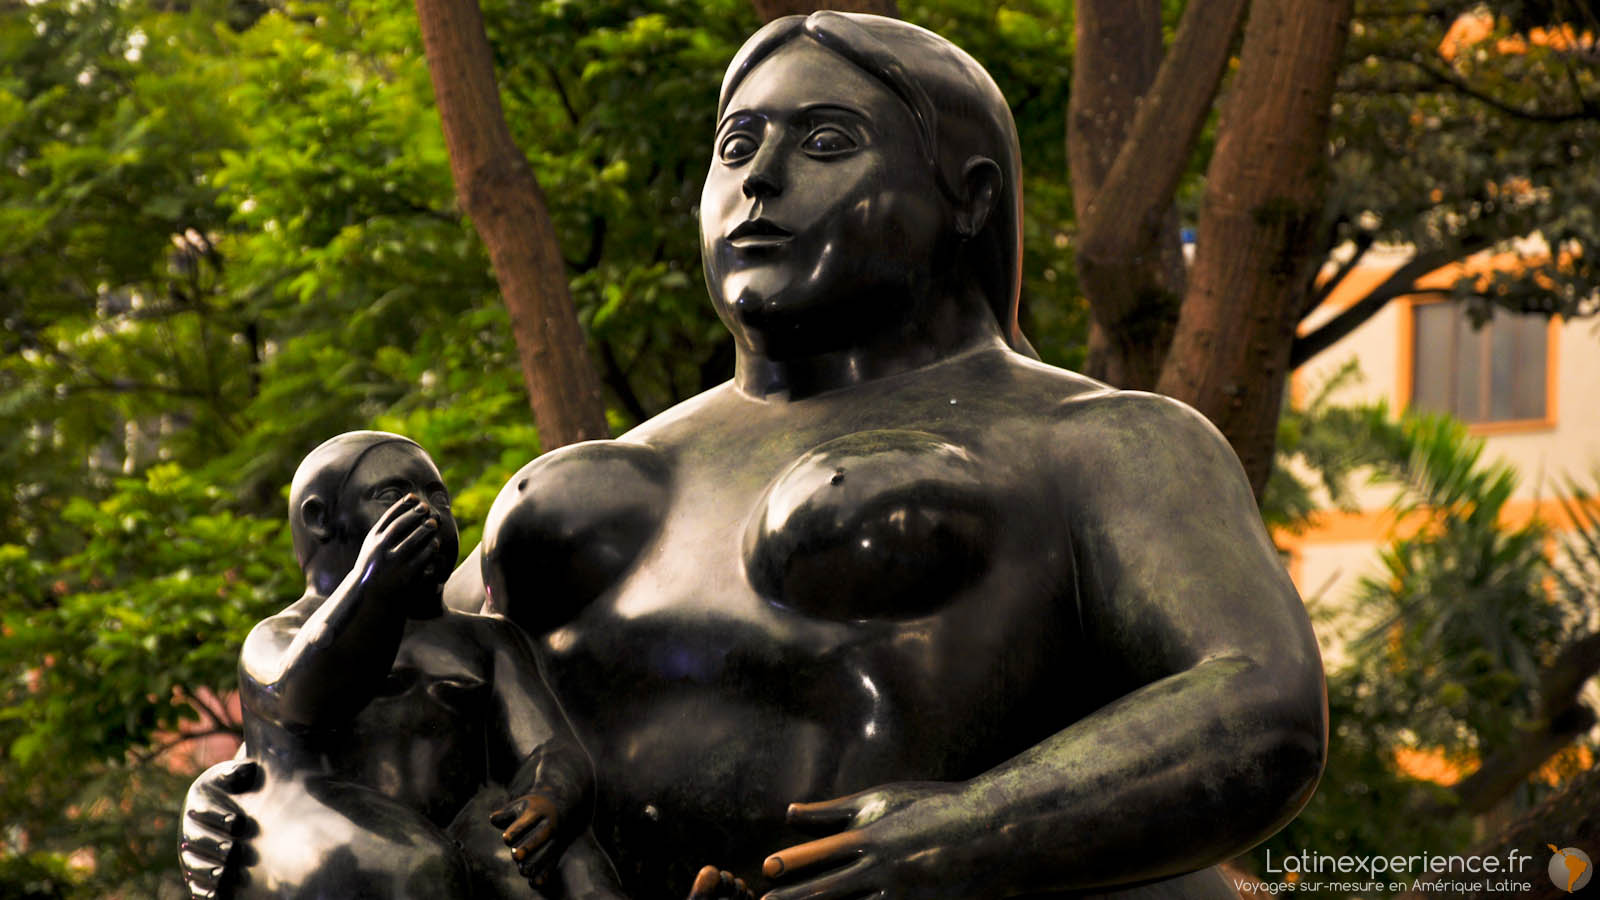 Colombie - Medellin - Place Botero - Latinexperience-voyages